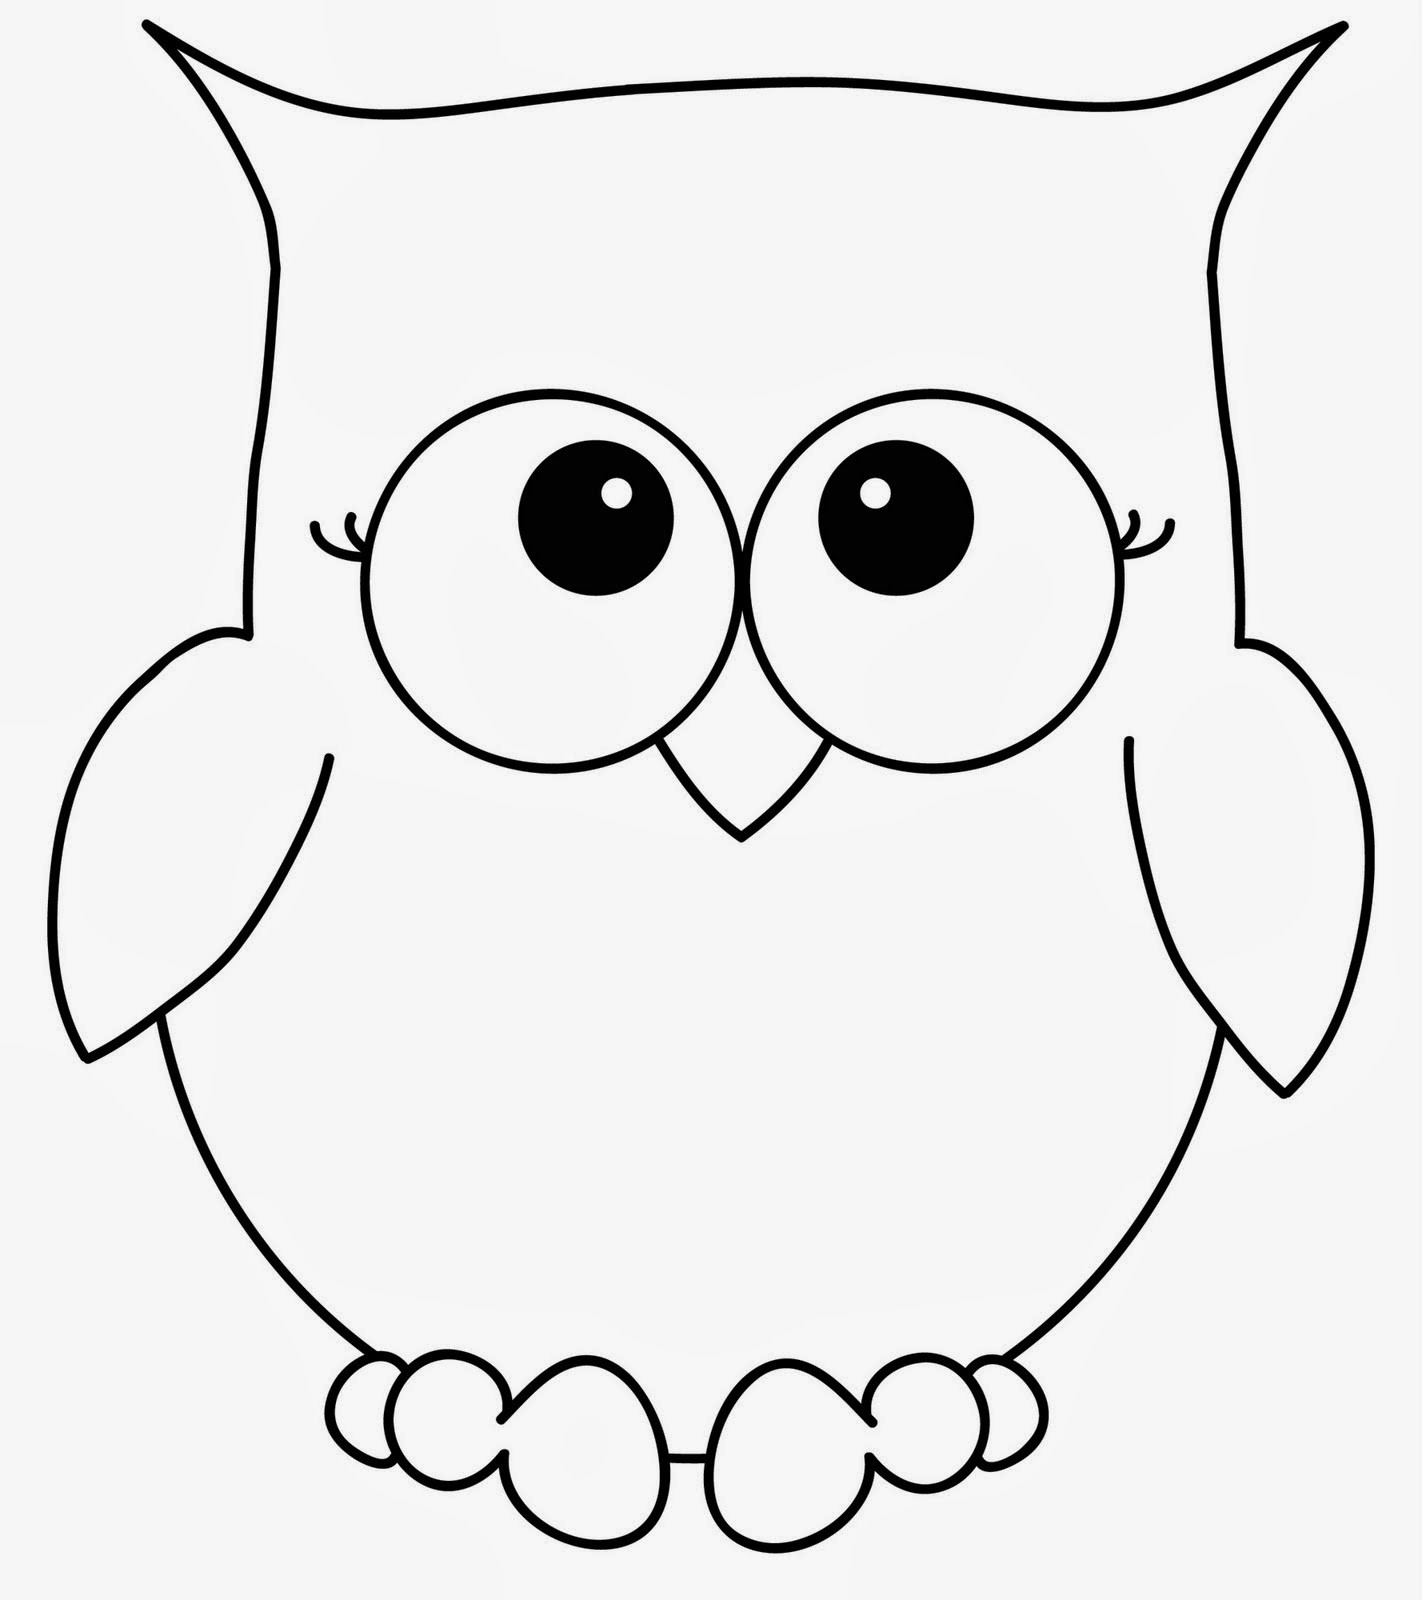 Cute Owl Coloring Pages
 Selimut ku Cute Lil Owl